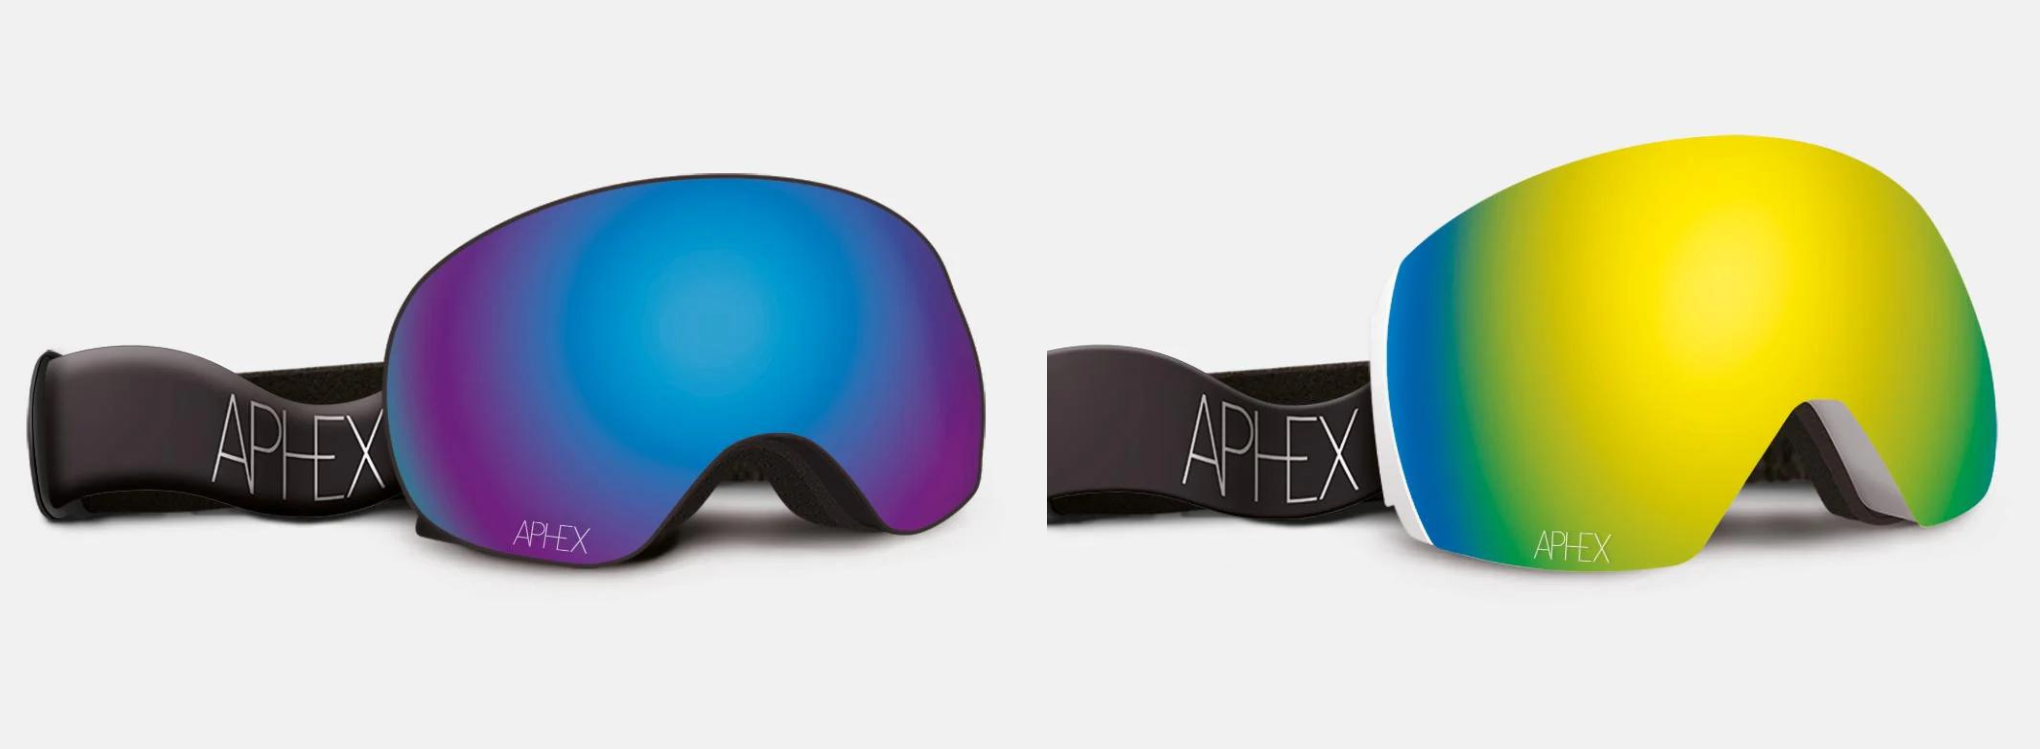 two pairs of ski goggles, one yellow lens, one blue-purple